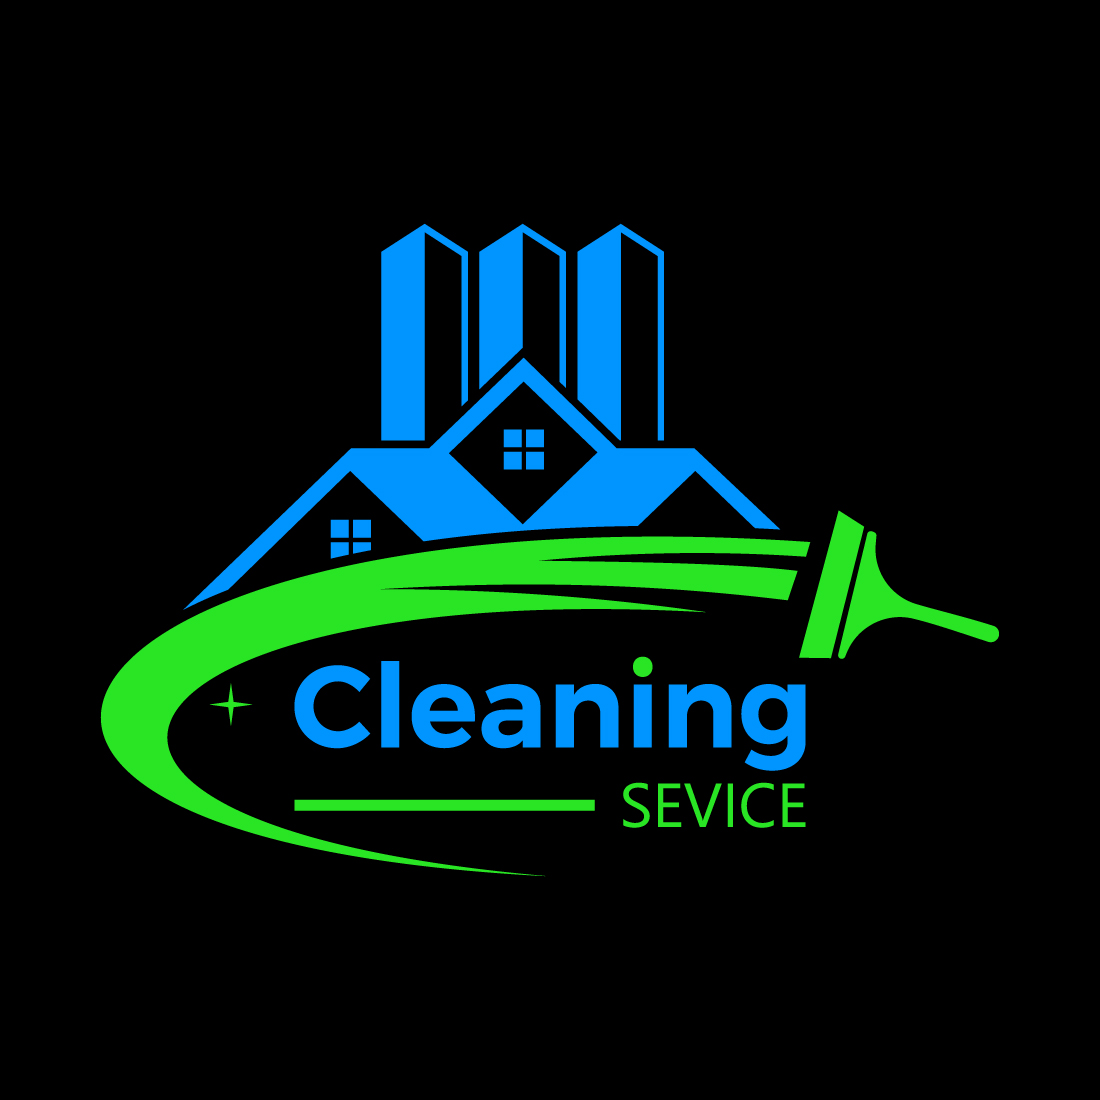 Cleaning service logo design, Vector design concept cover image.